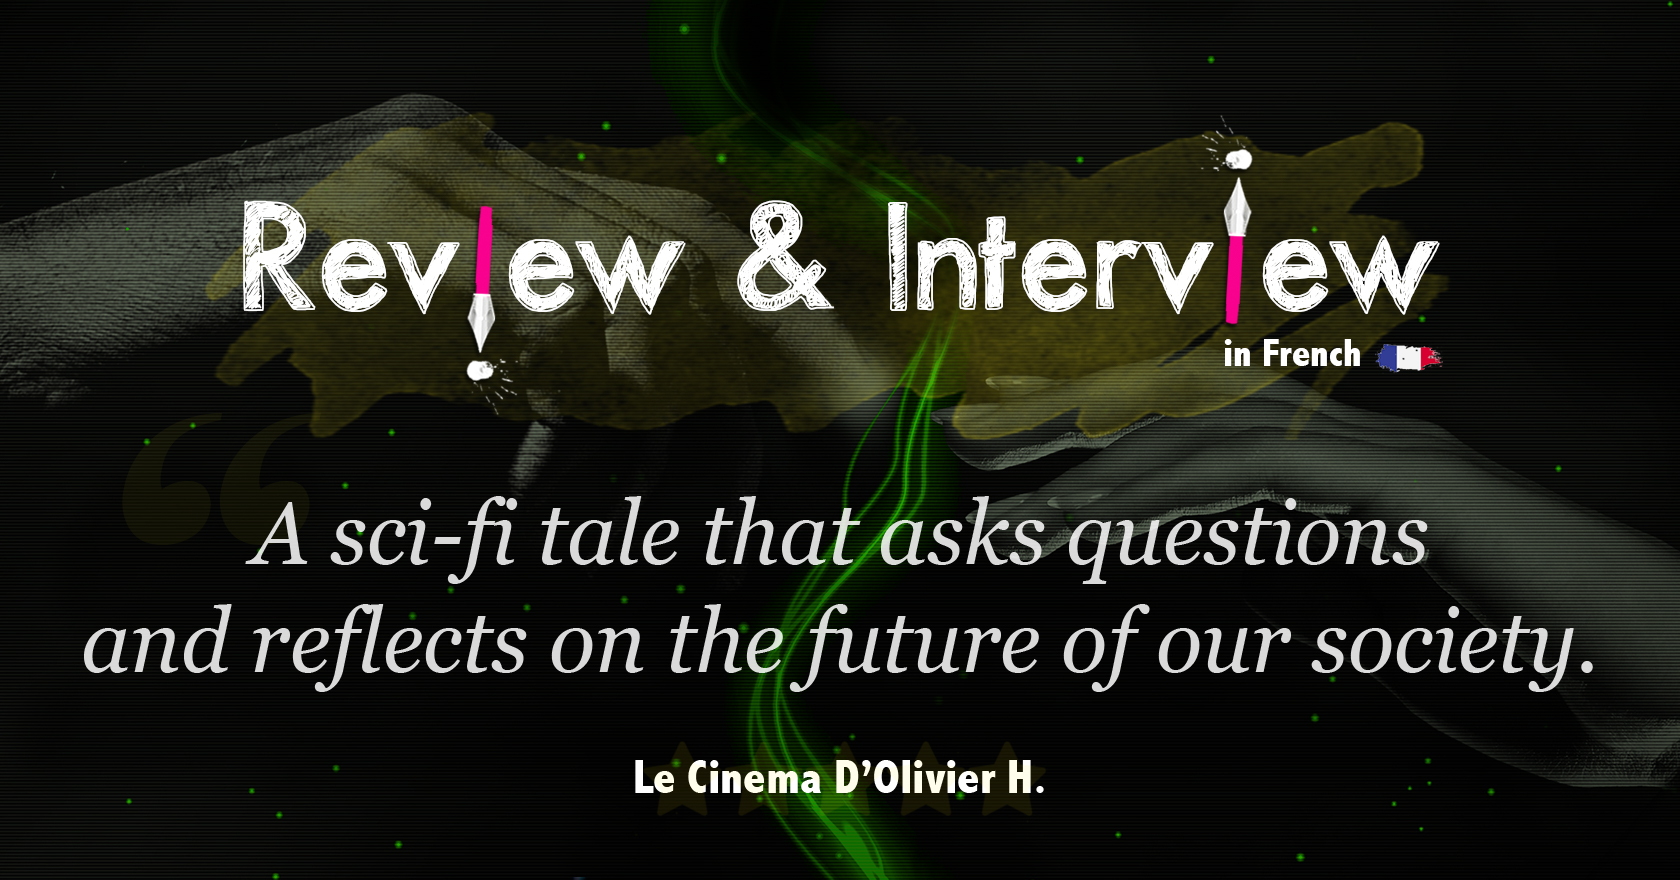 Review & Interview on French Movie Blog Le Cinema D’Olivier H.